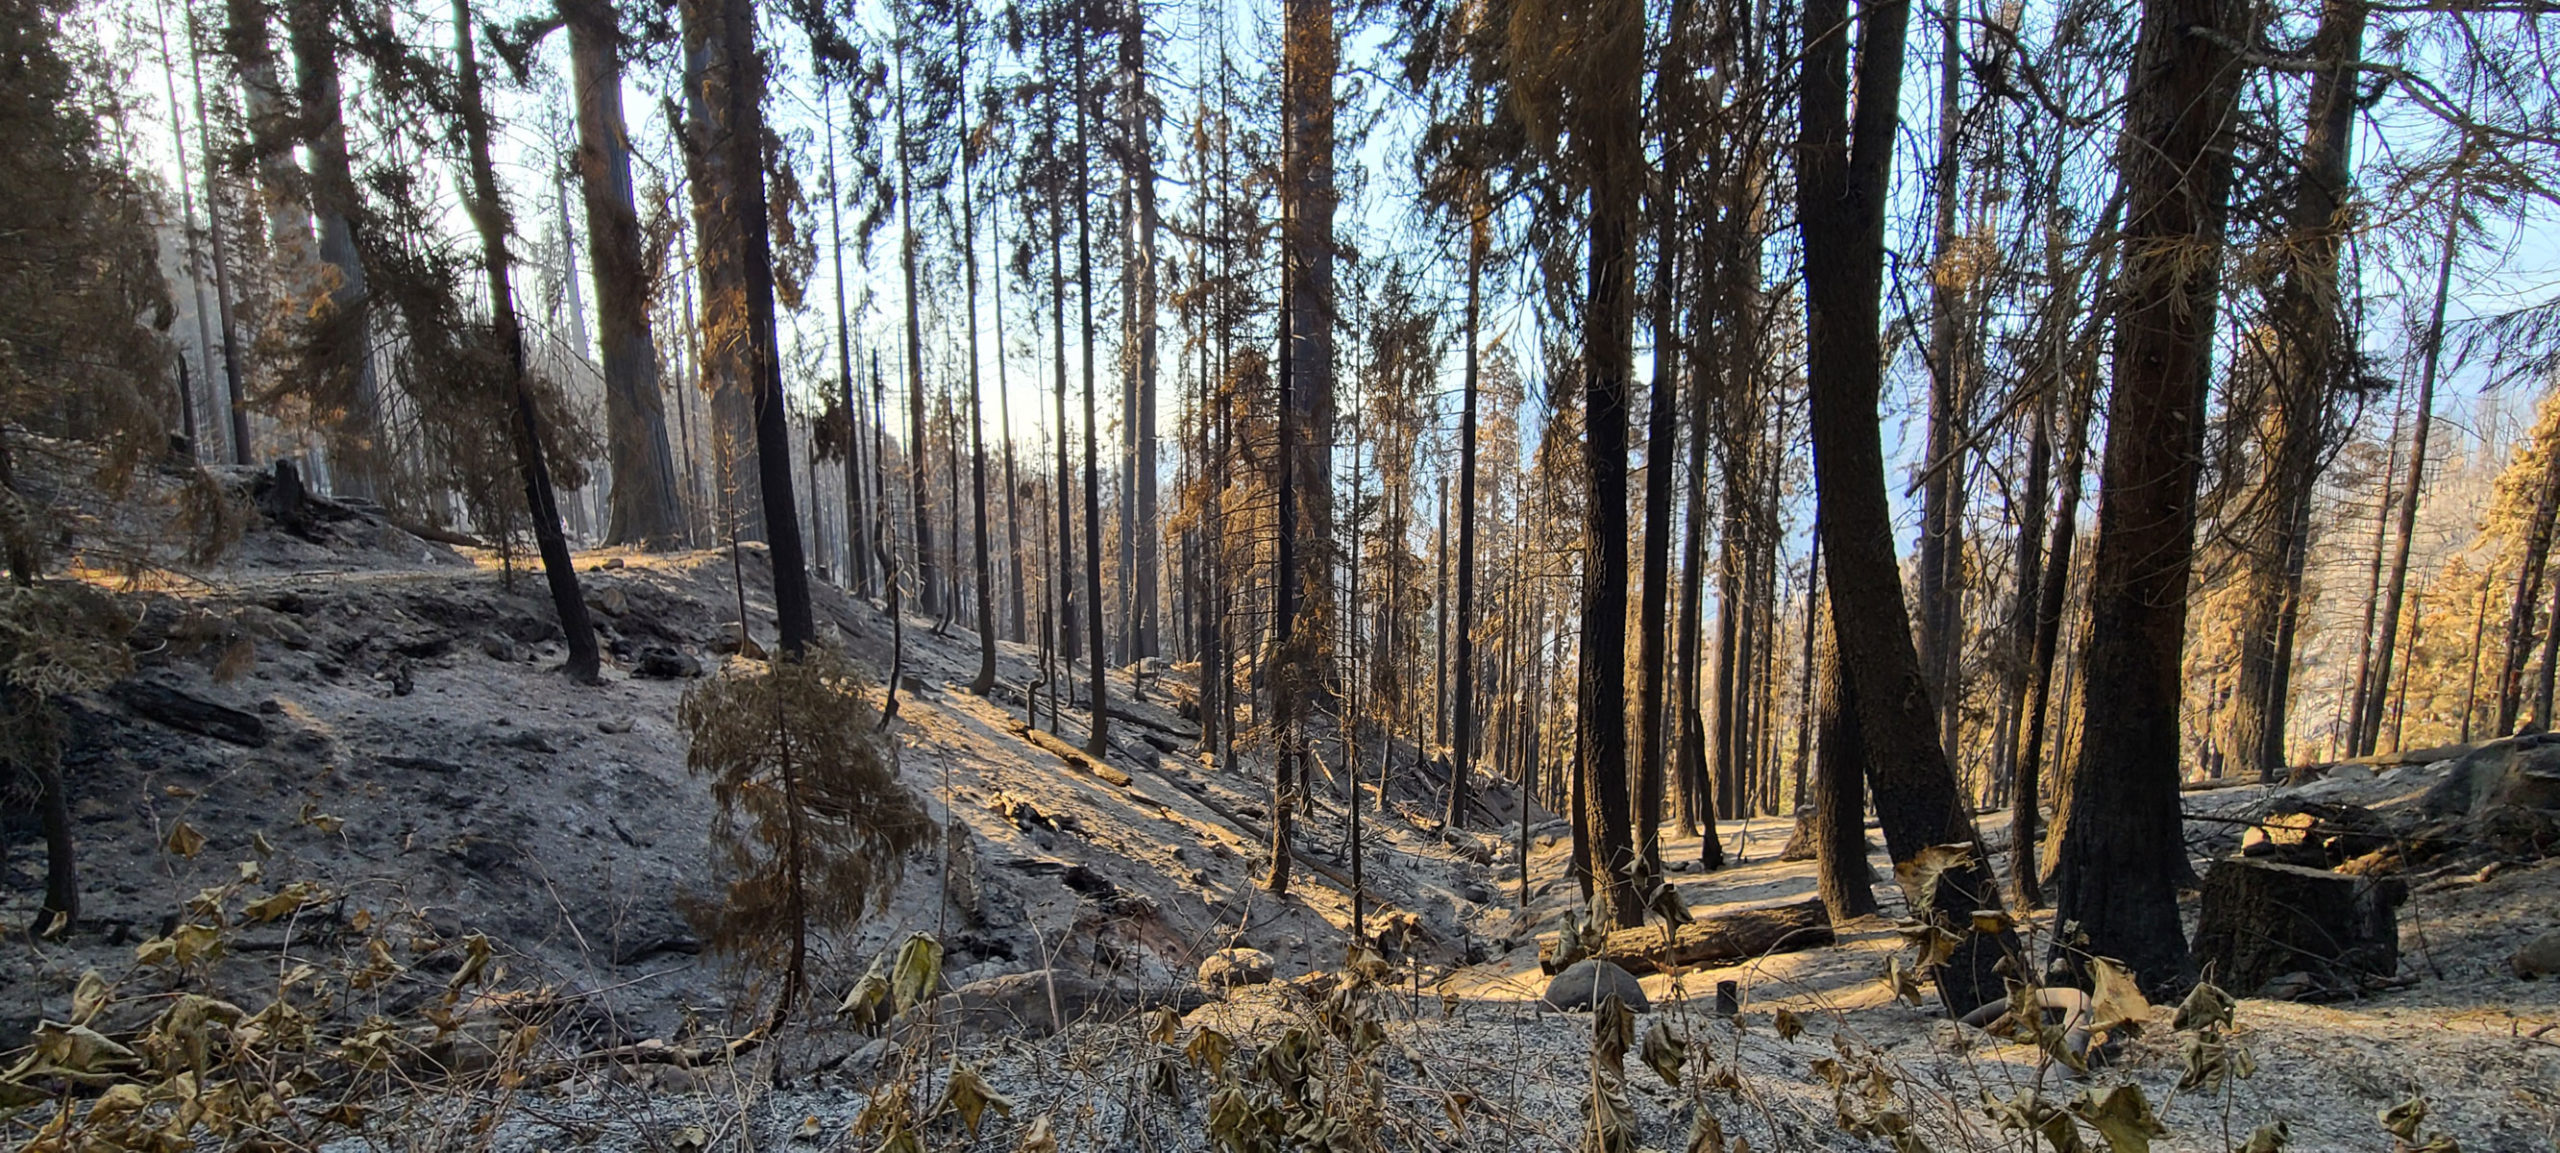 The 2020 SQF Complex Fire burned a portion of the Alder Creek property owned by Save the Redwoods League. At least 80 giant sequoia monarchs were killed in the areas where the fires burned at a high intensity.  Credit: Save the Redwoods League